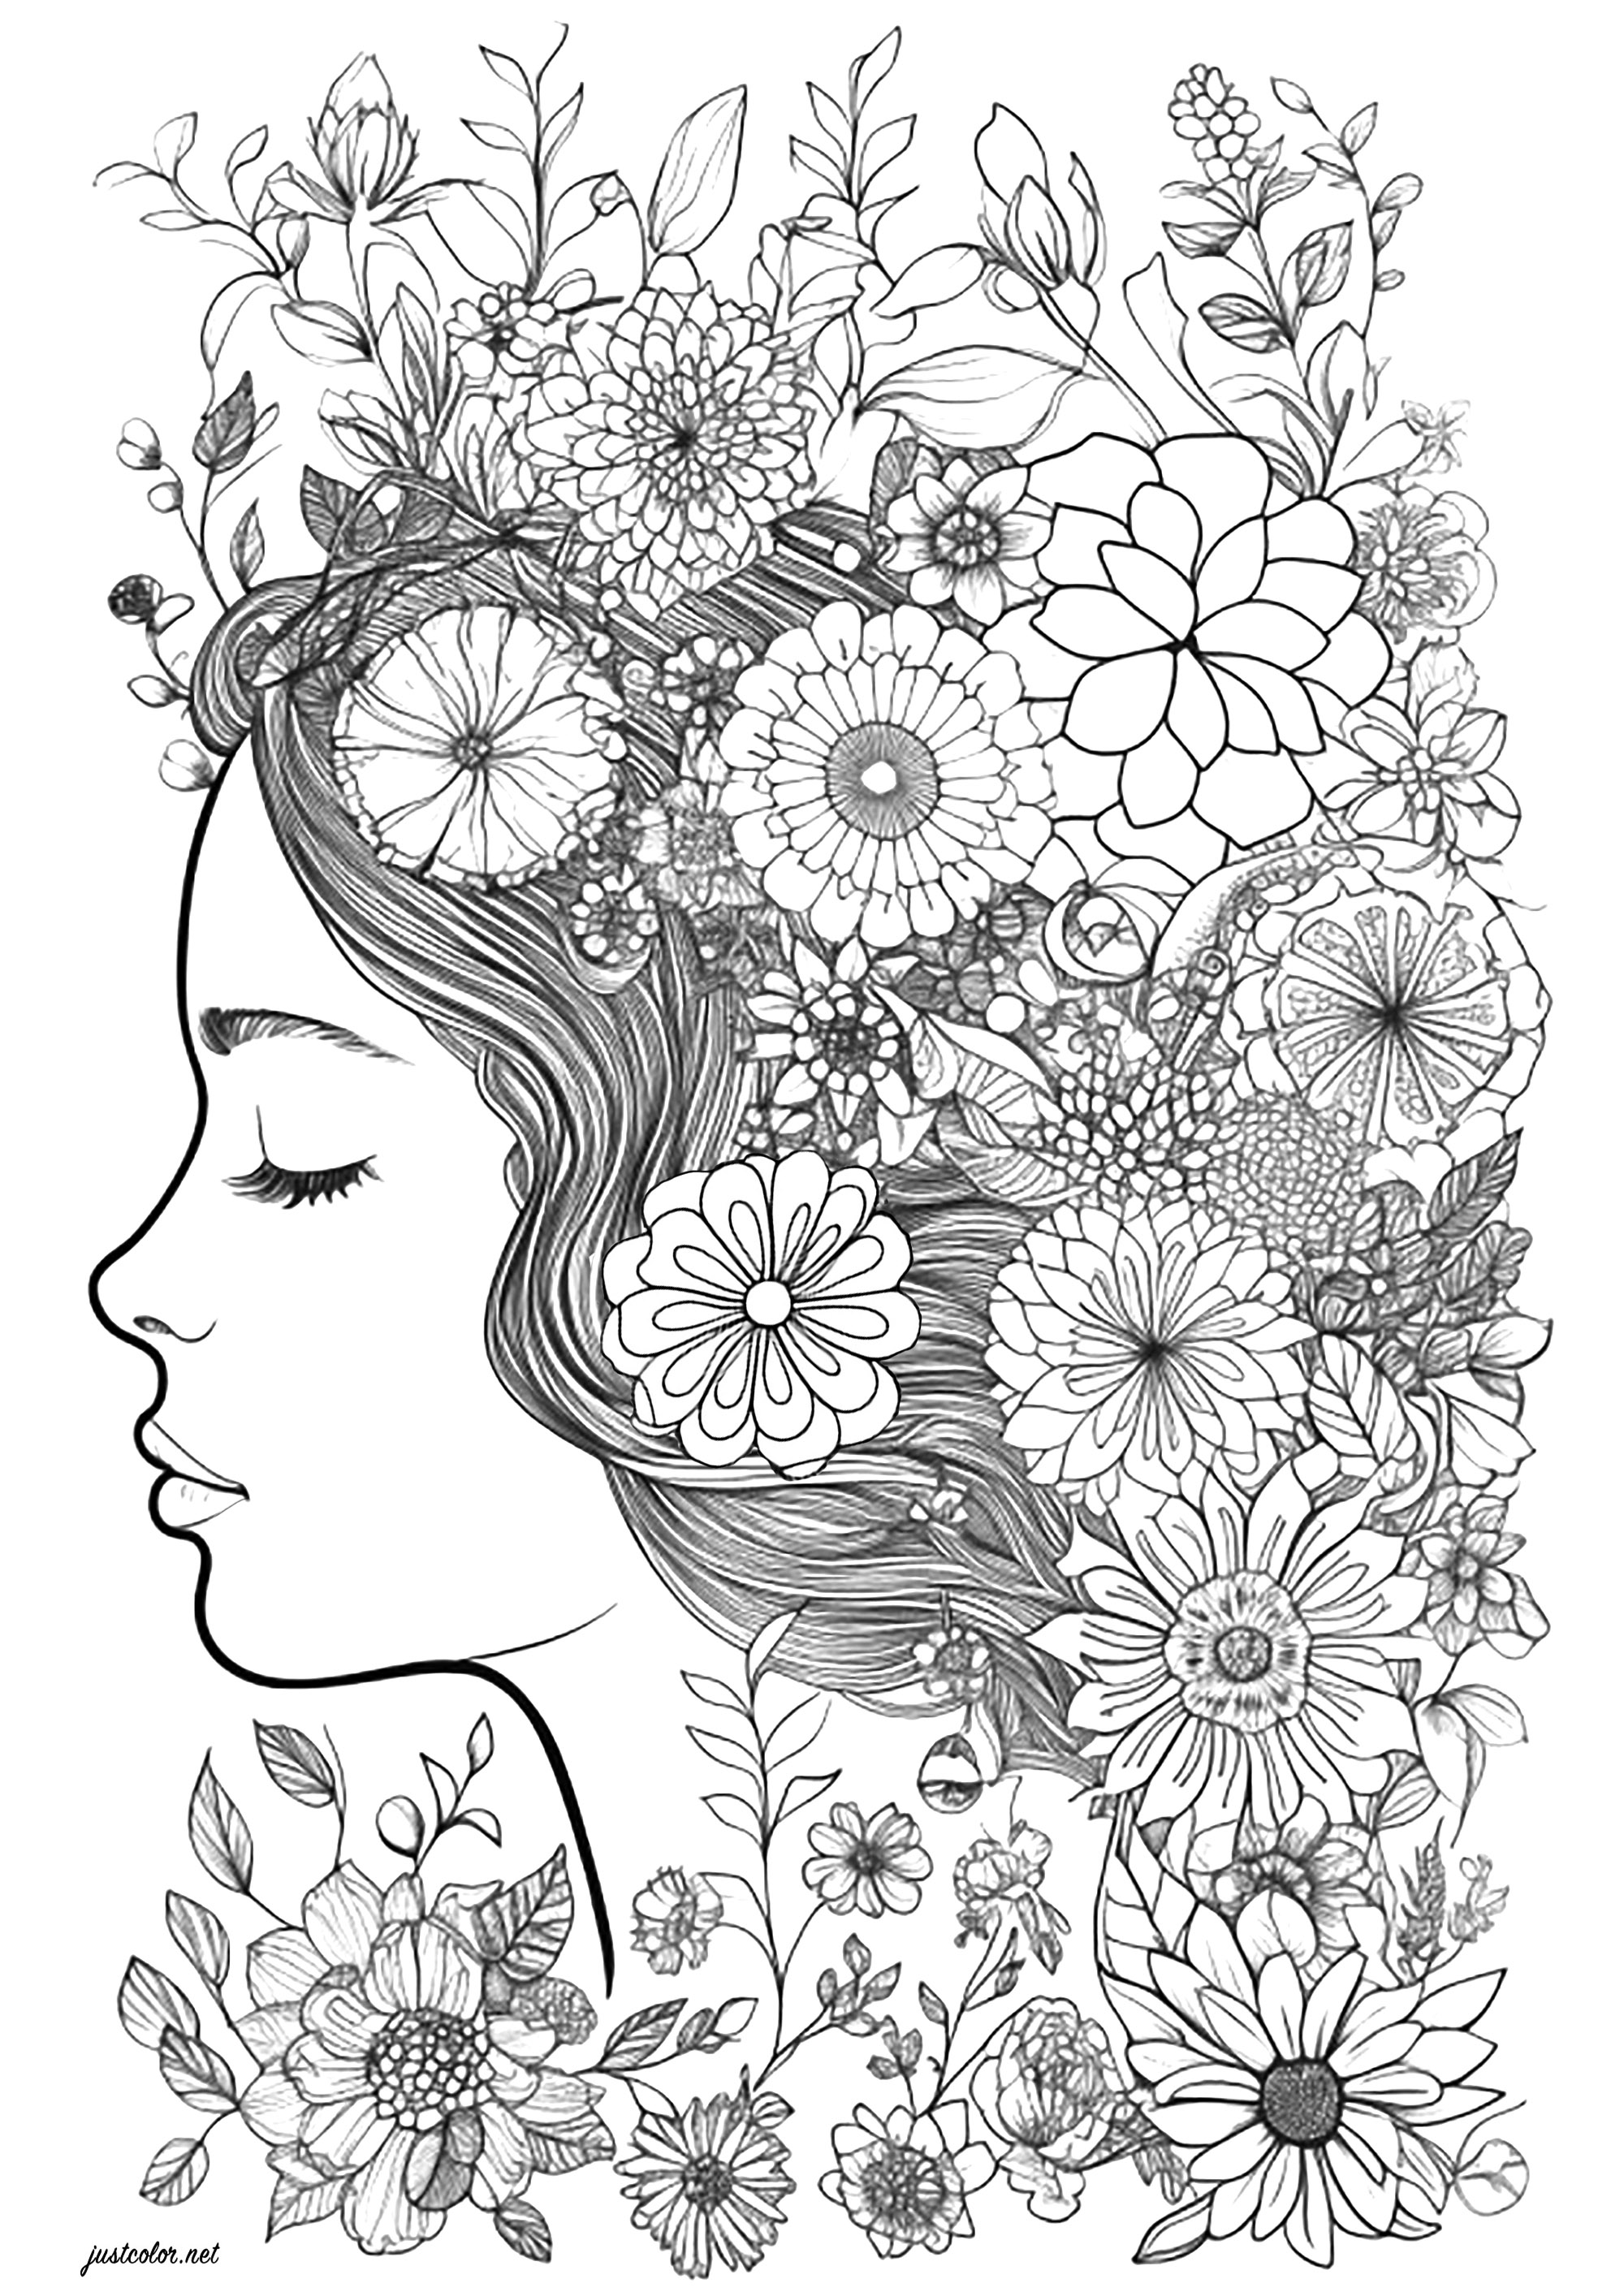 Face of a woman with closed eyes, surrounded by flowers. Superb coloring of a woman's face in profile, whose hair is filled with beautiful flowers